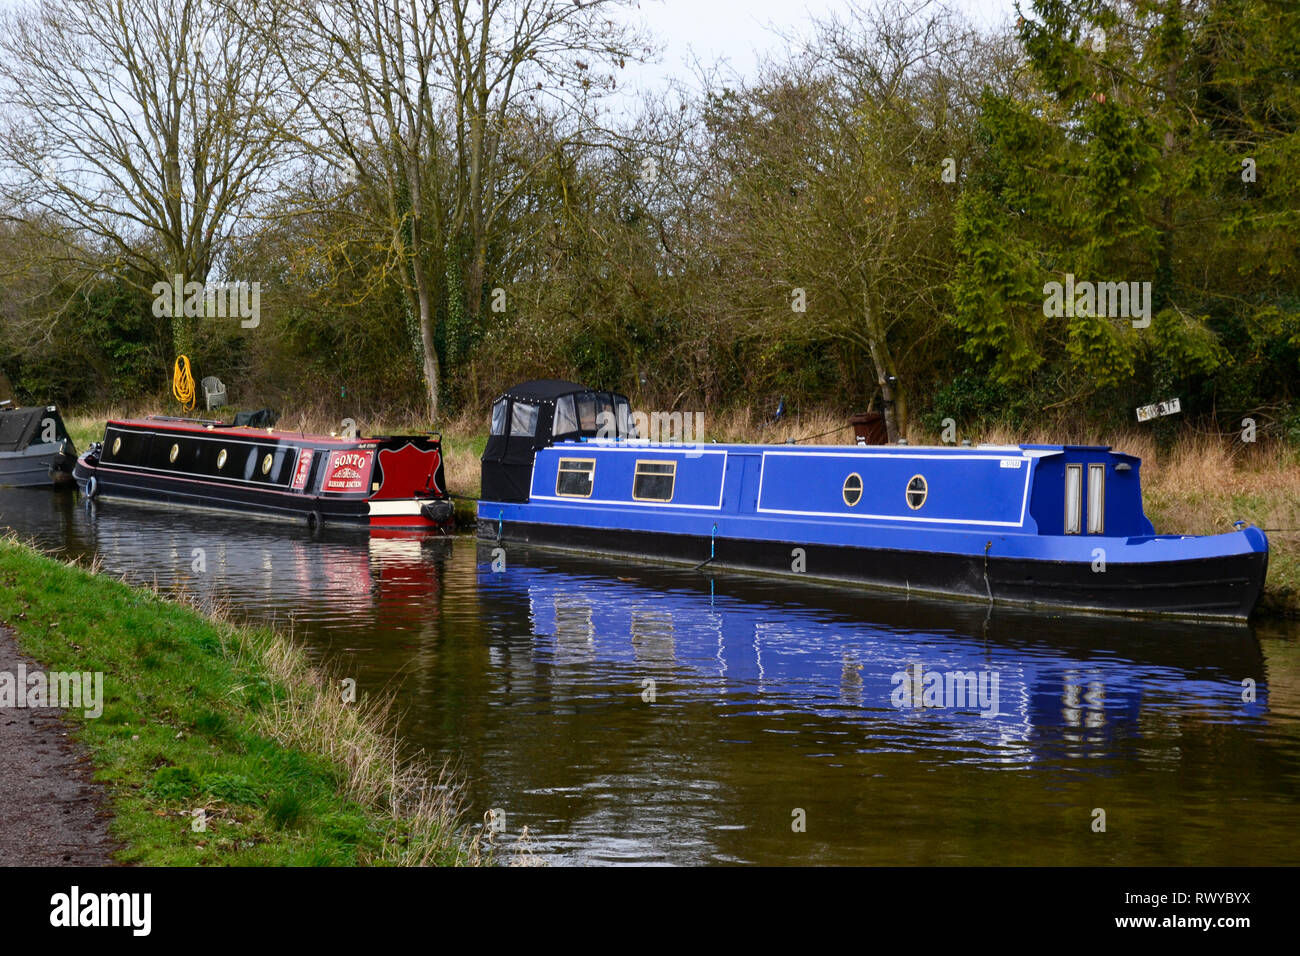 Narrowboats in the sunshine at The Grand Union Canal, Aston Clinton, Buckinghamshire / Hertfordshire Border, England, UK. March 2019 Stock Photo